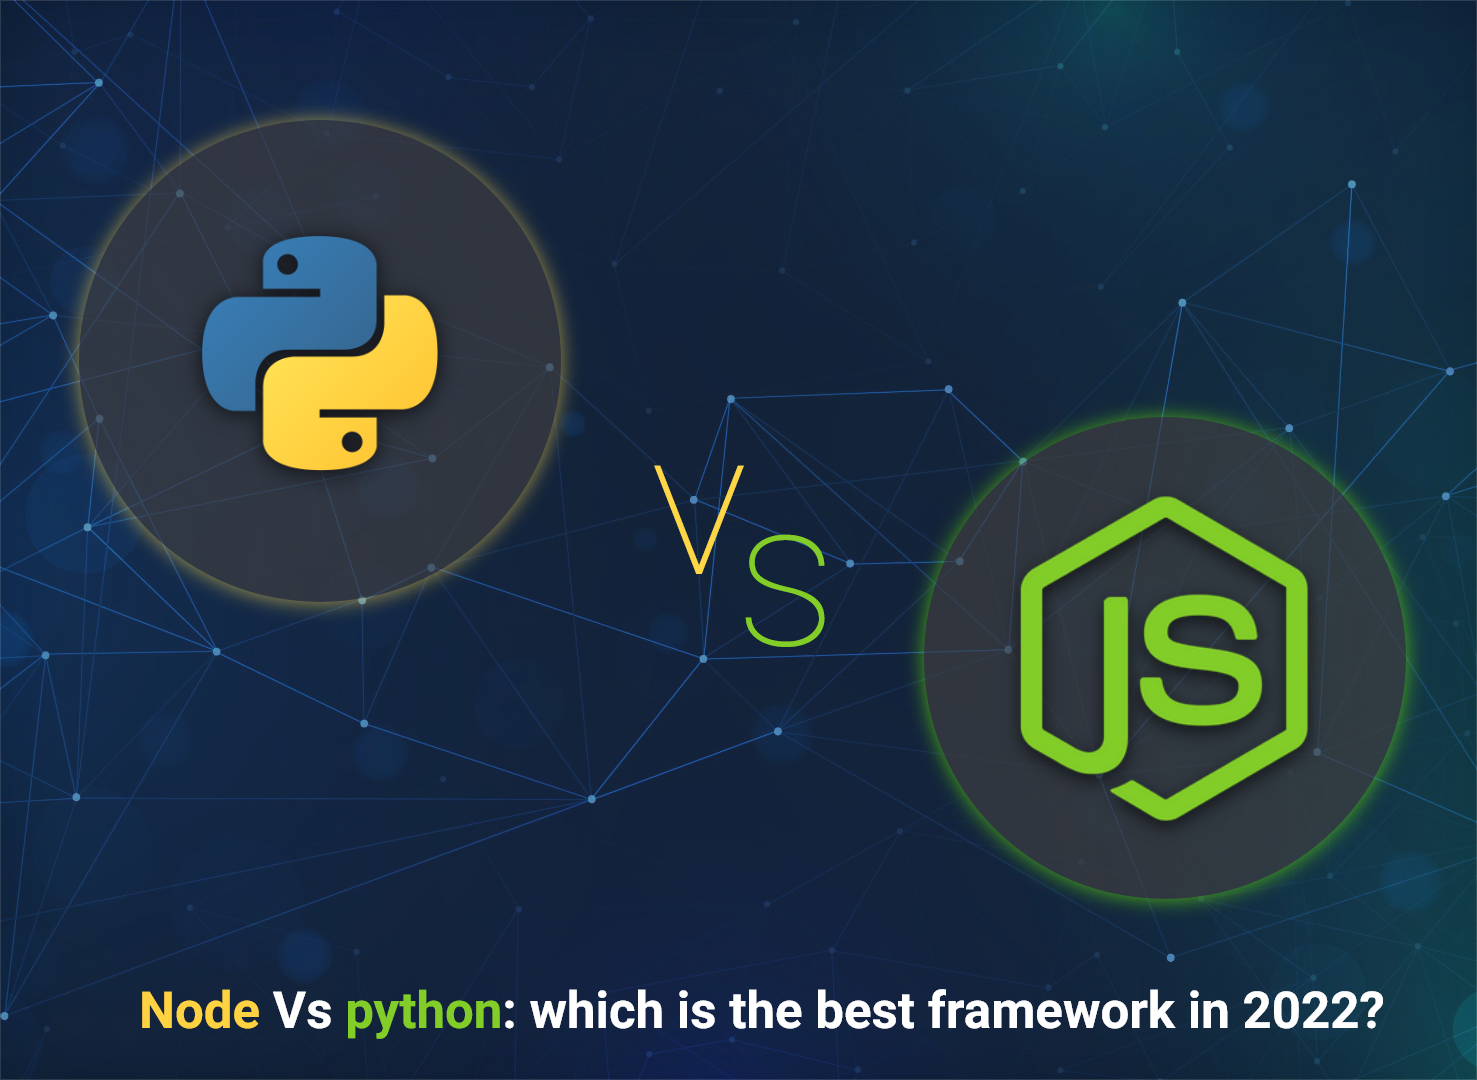 Node Vs python: which is the best framework in 2022?